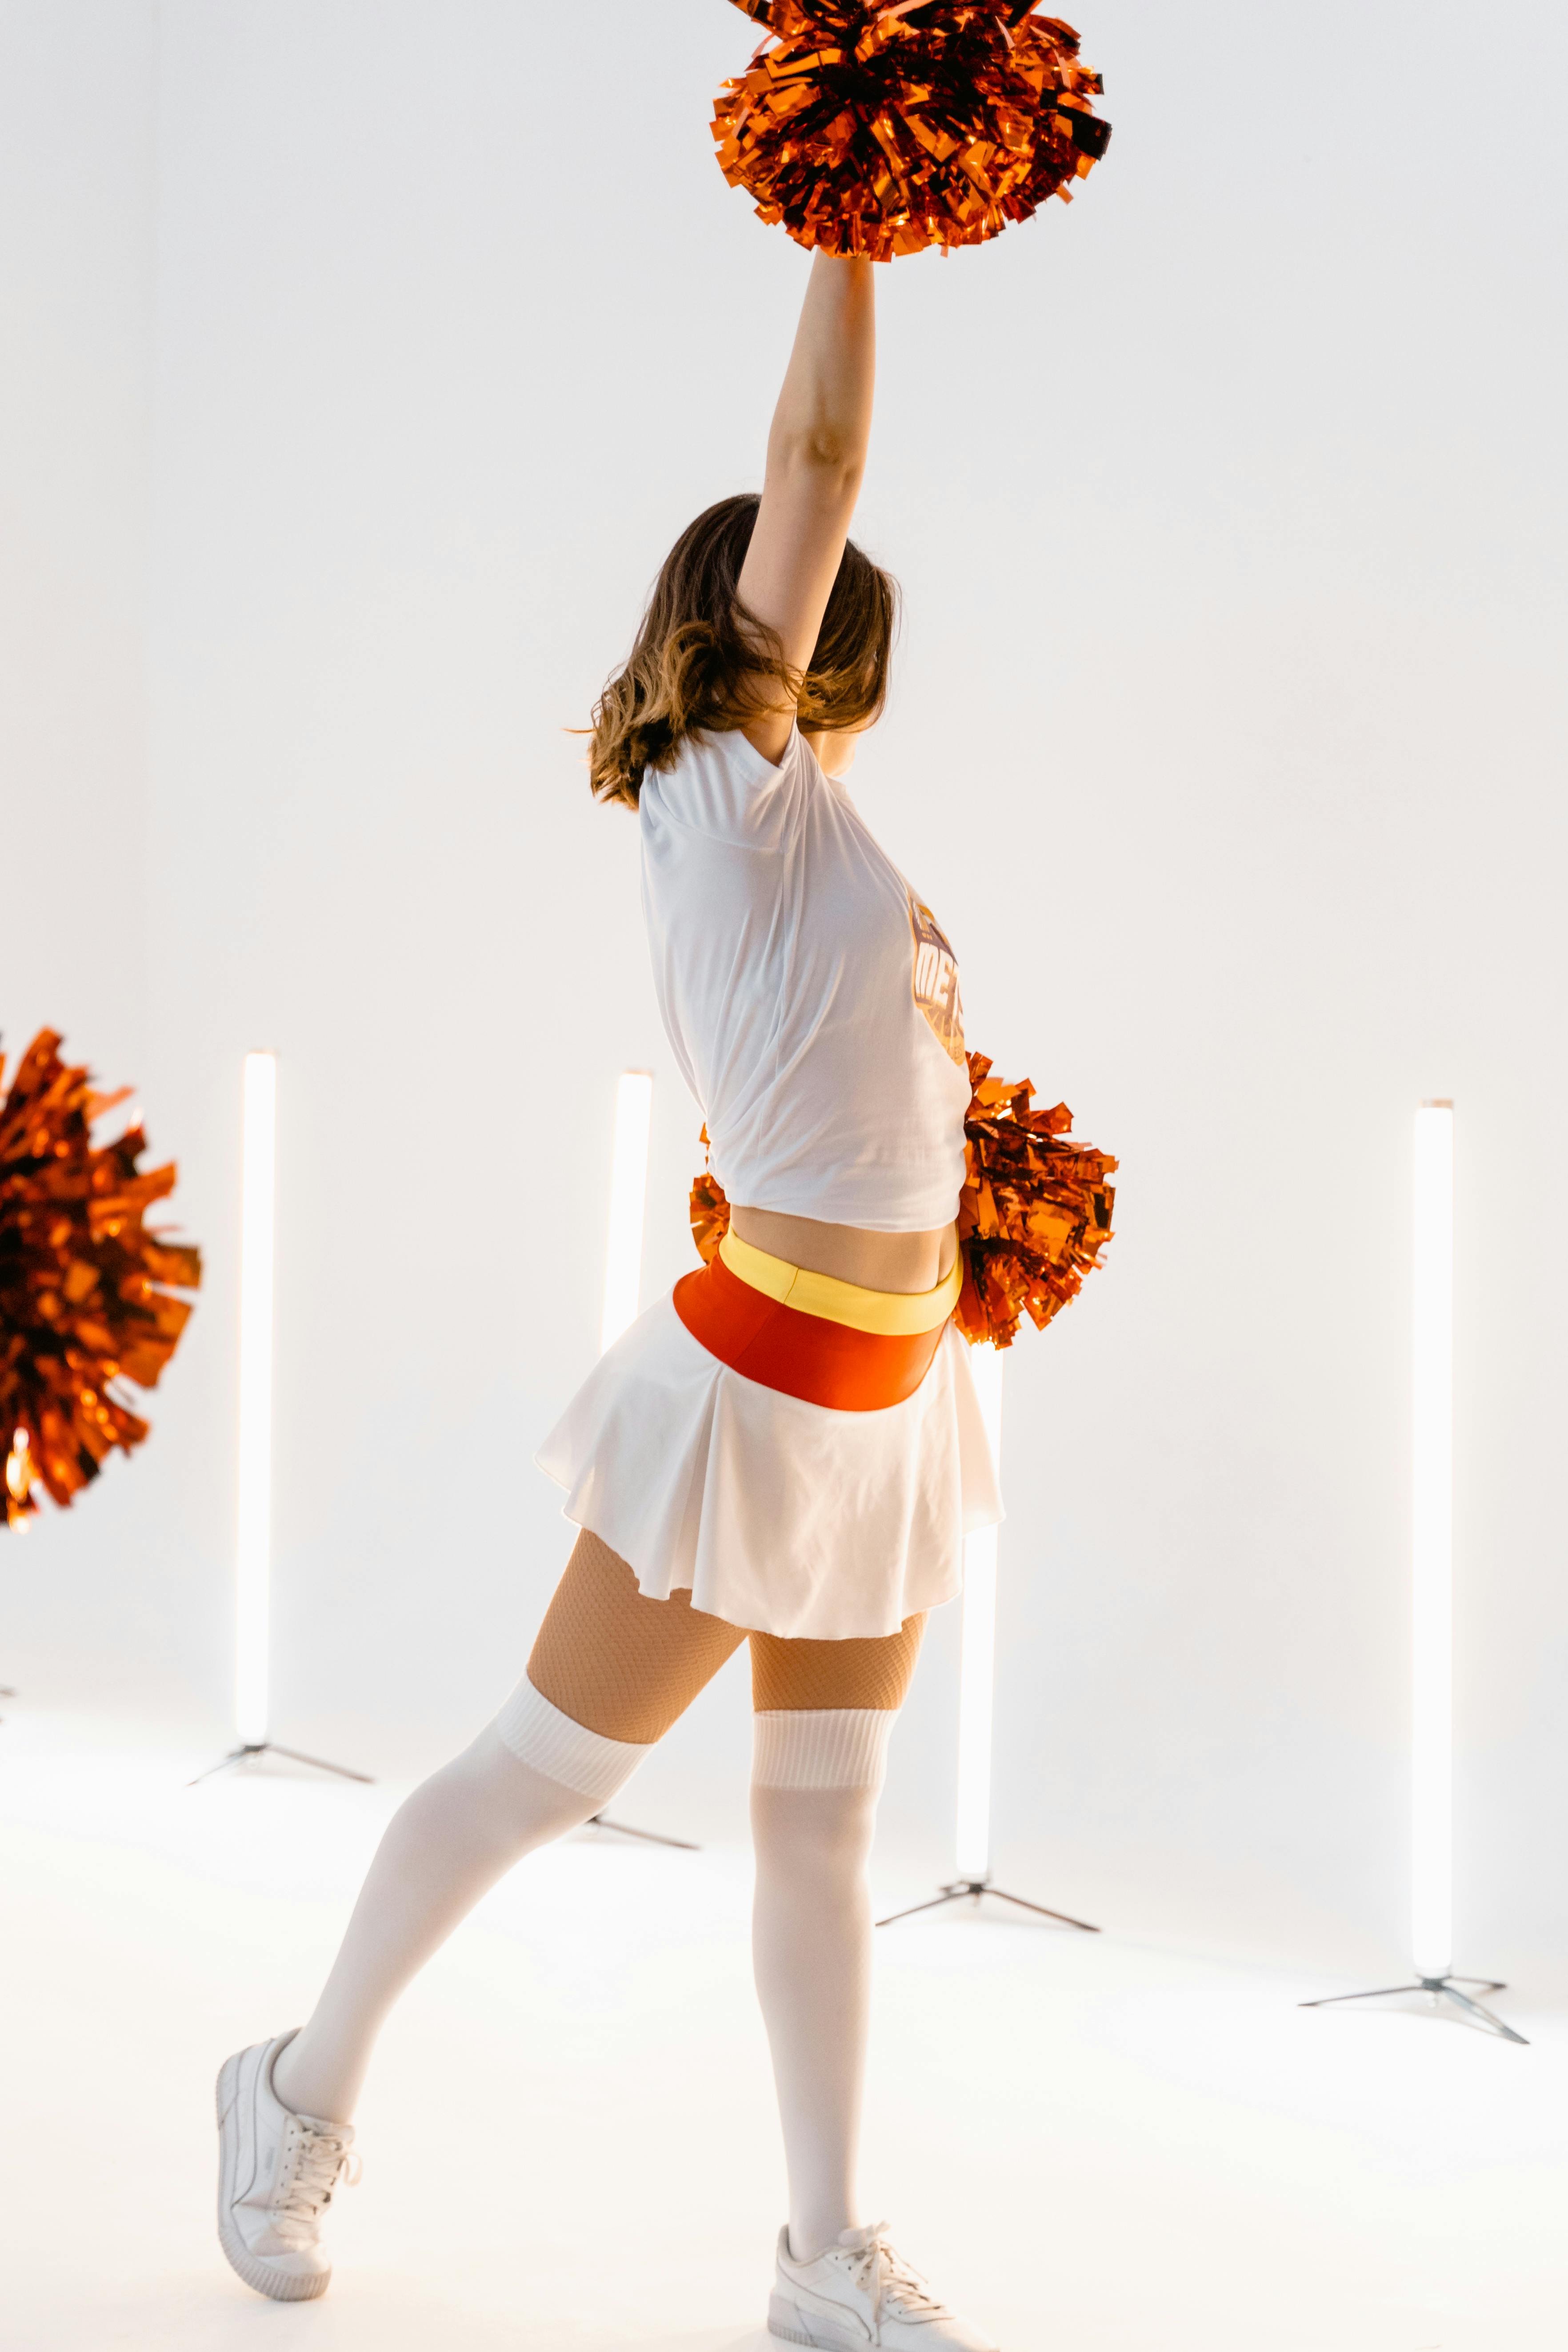 9+ Thousand Cheerleader Pom Poms Royalty-Free Images, Stock Photos